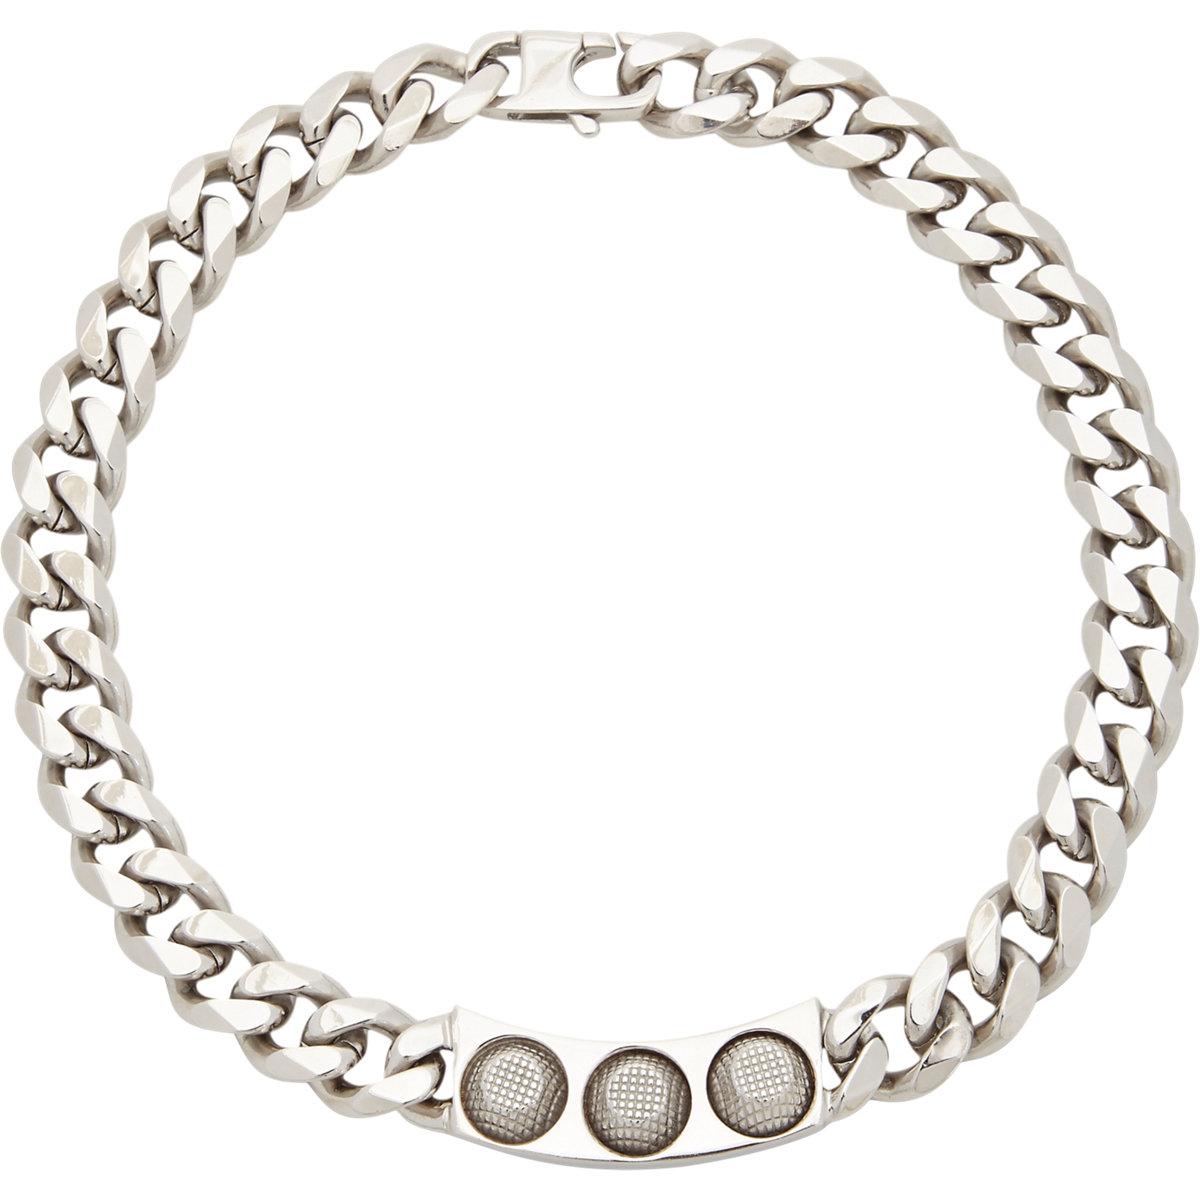 Balenciaga Studded Necklace in Silver | Lyst